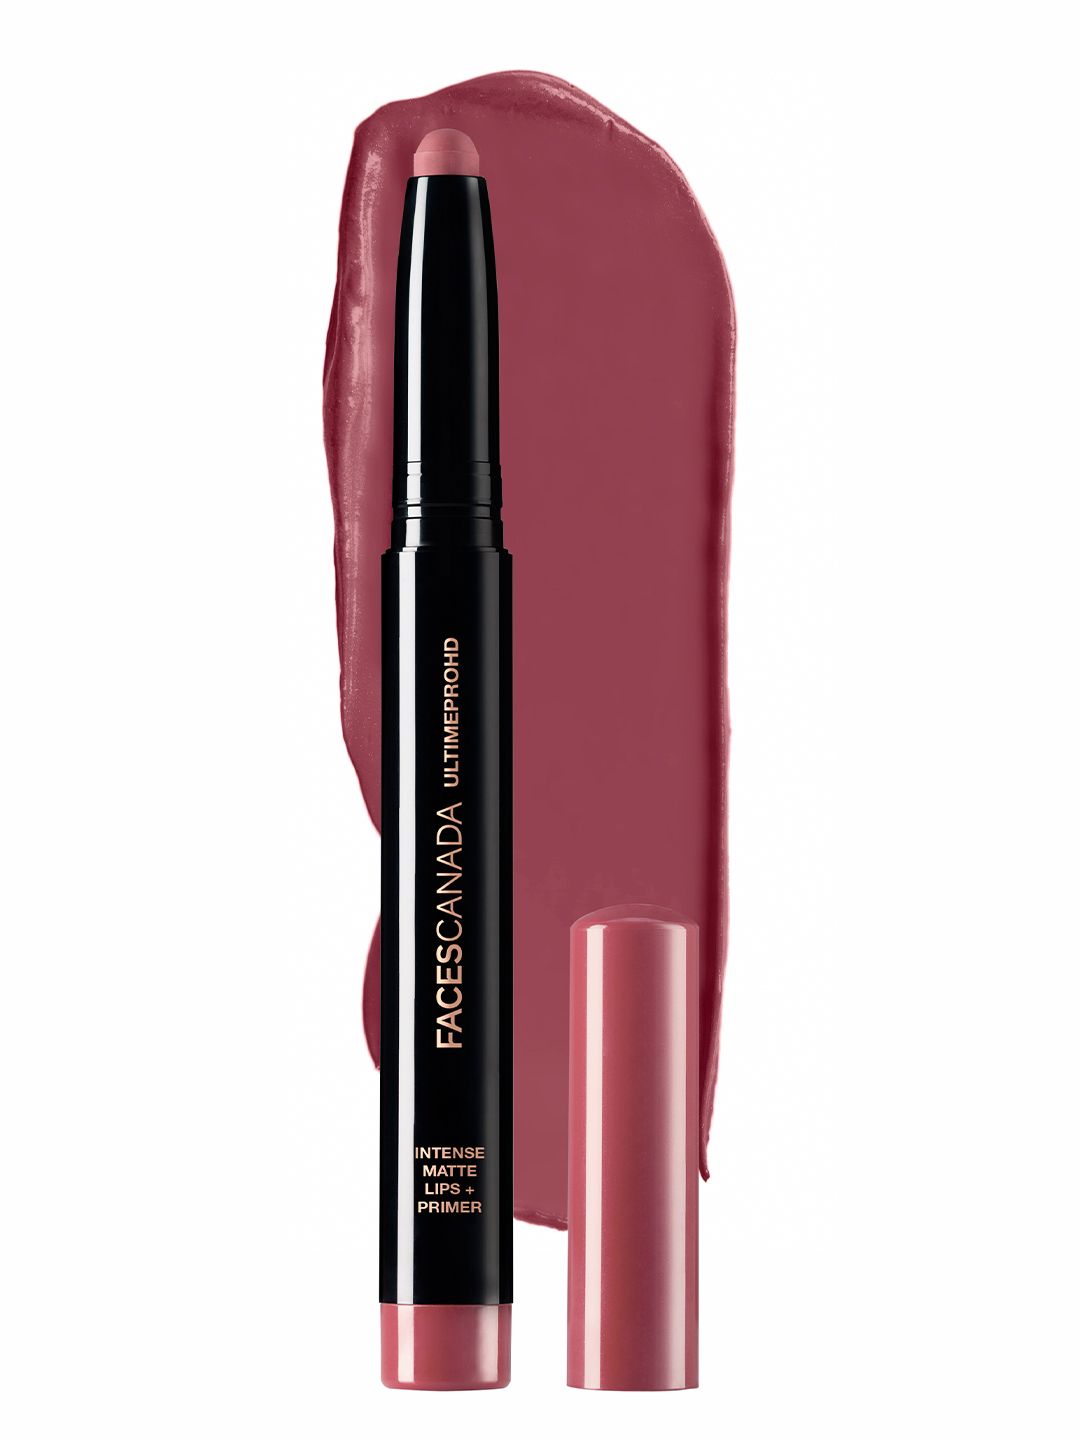 FACES CANADA Ultimepro Hd Intense Matte Lips + Primer Magnetic with Mica 02 1.4gm Price in India